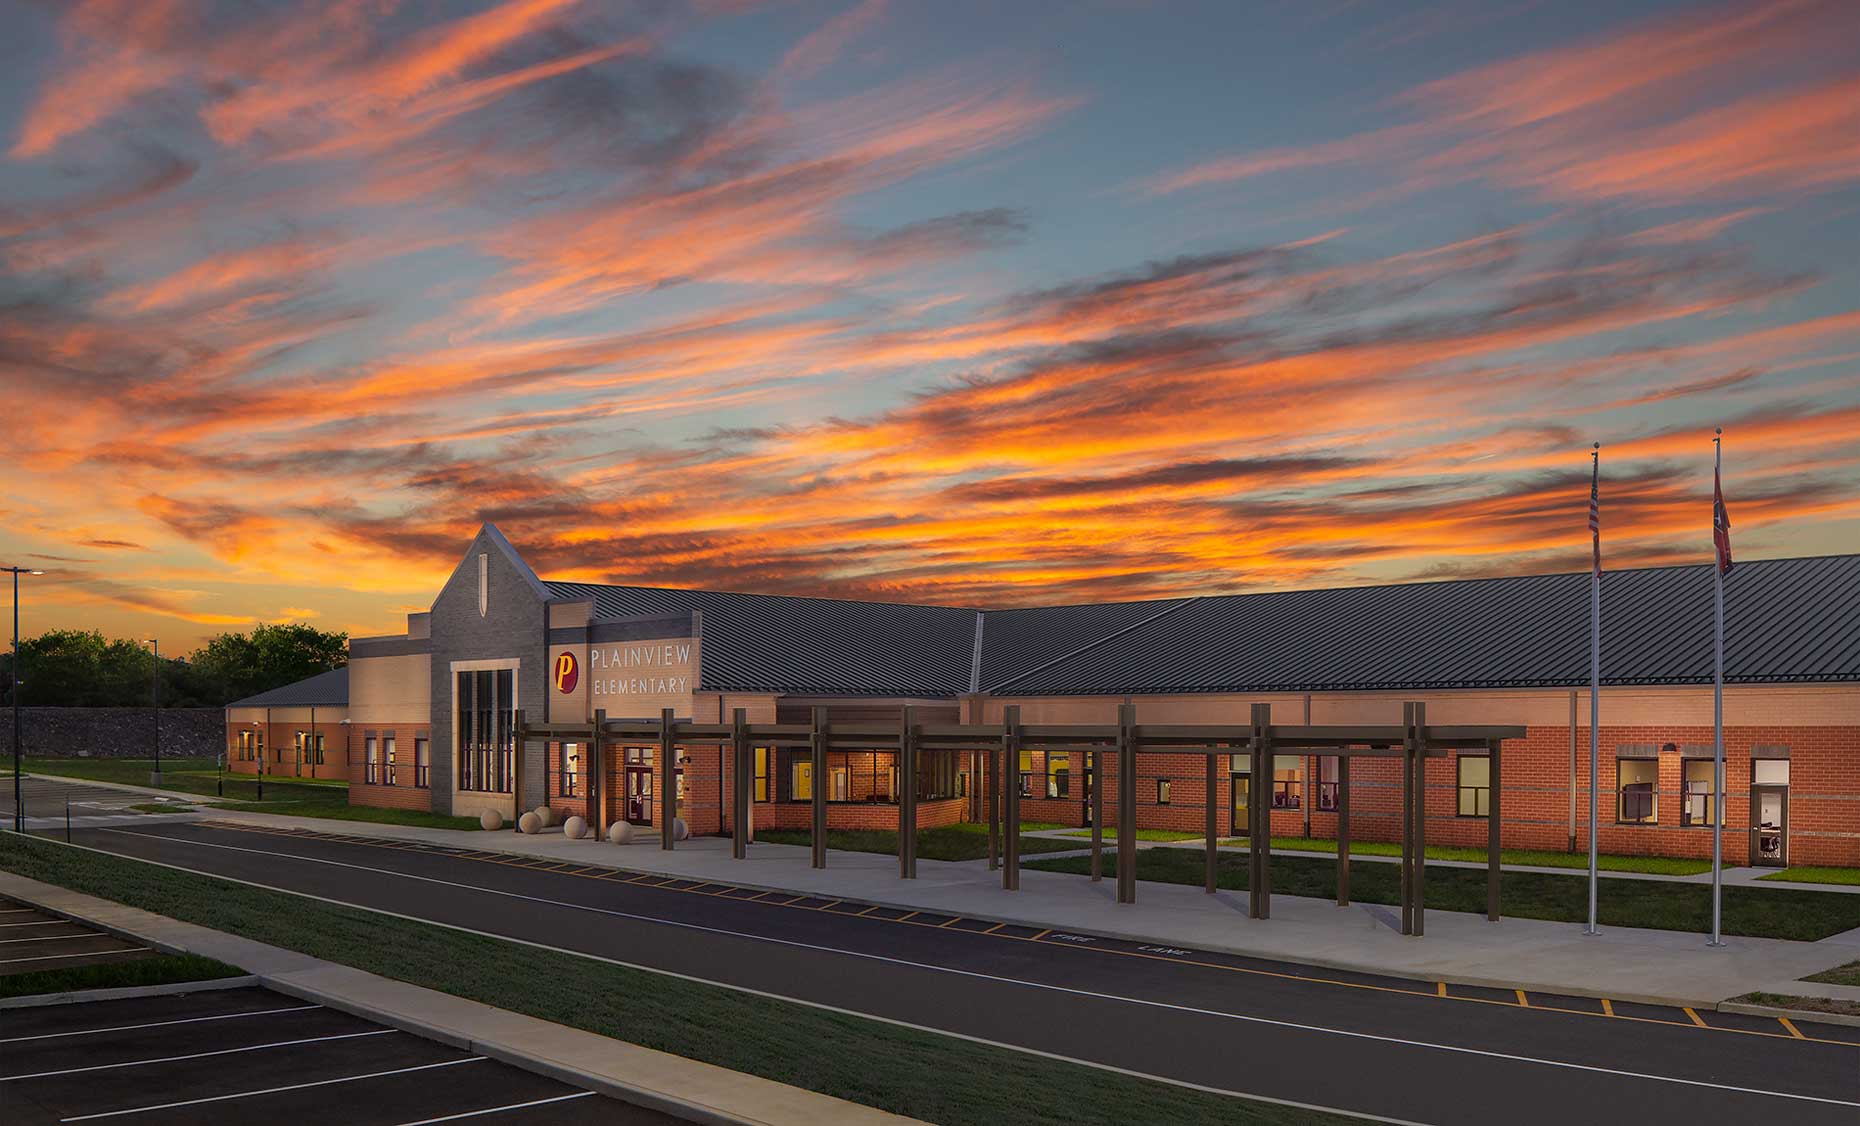 Plainview Elementary School at Sunset